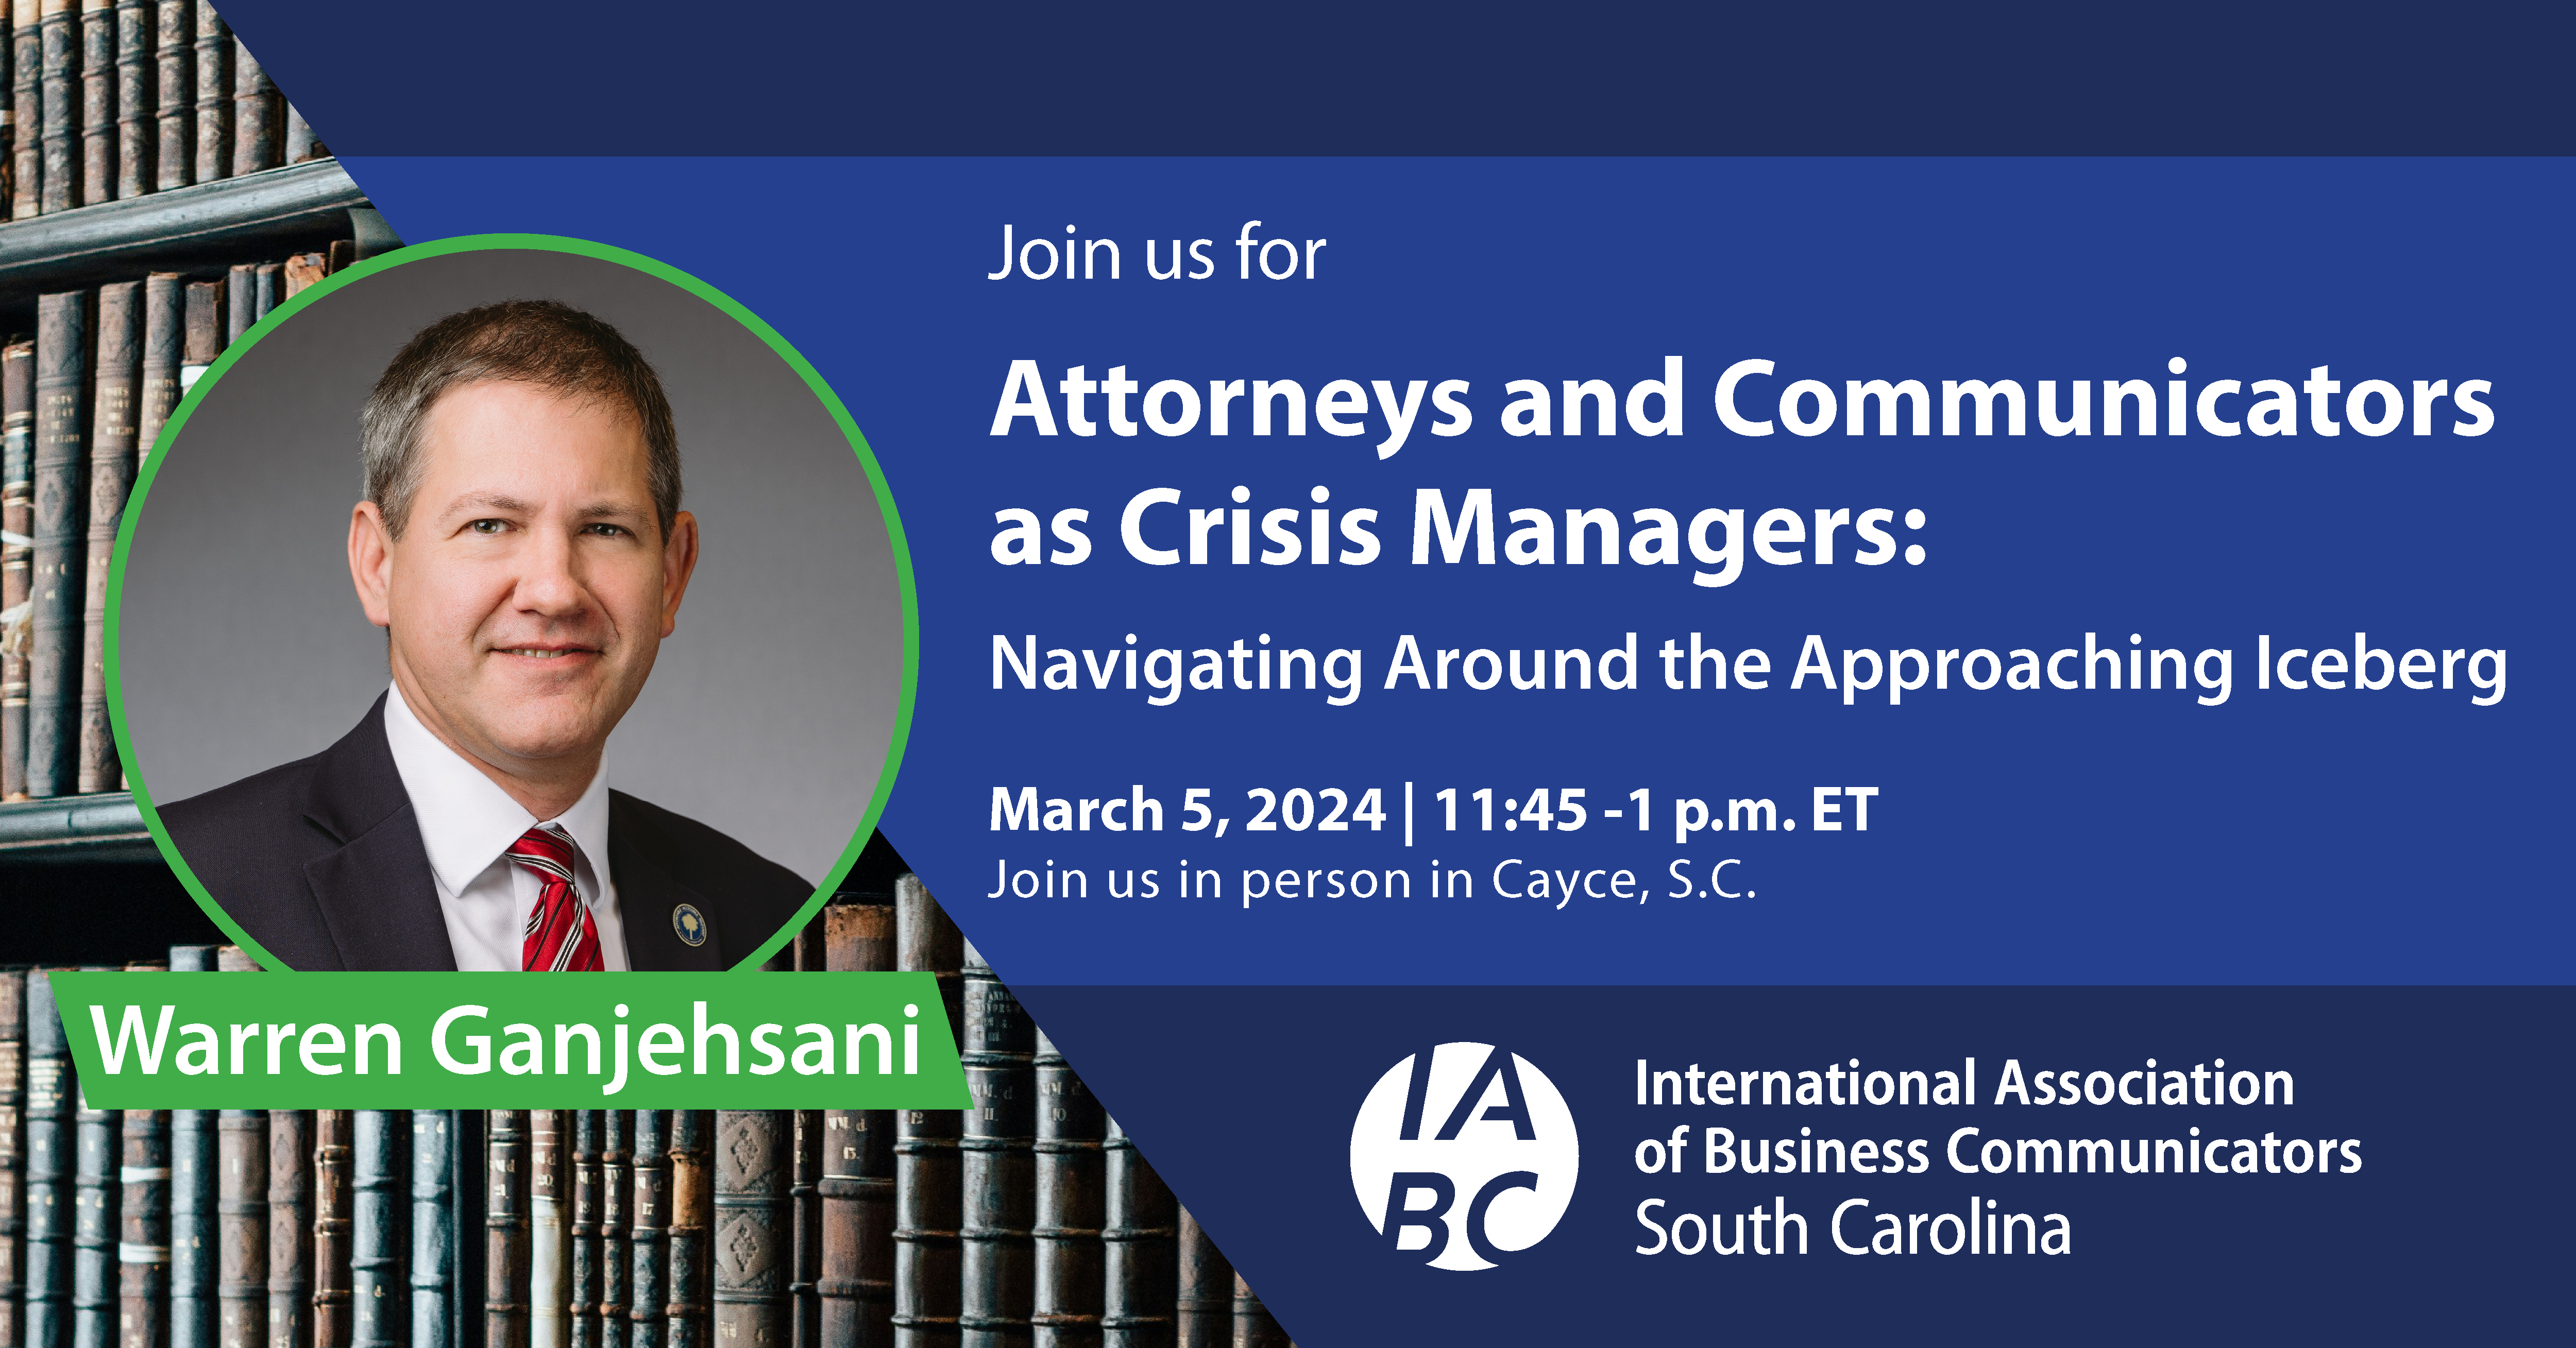 March 5: Attorneys and Communicators as Crisis Managers: Navigating Around the Approaching Iceberg with speaker Warren Ganjehsani